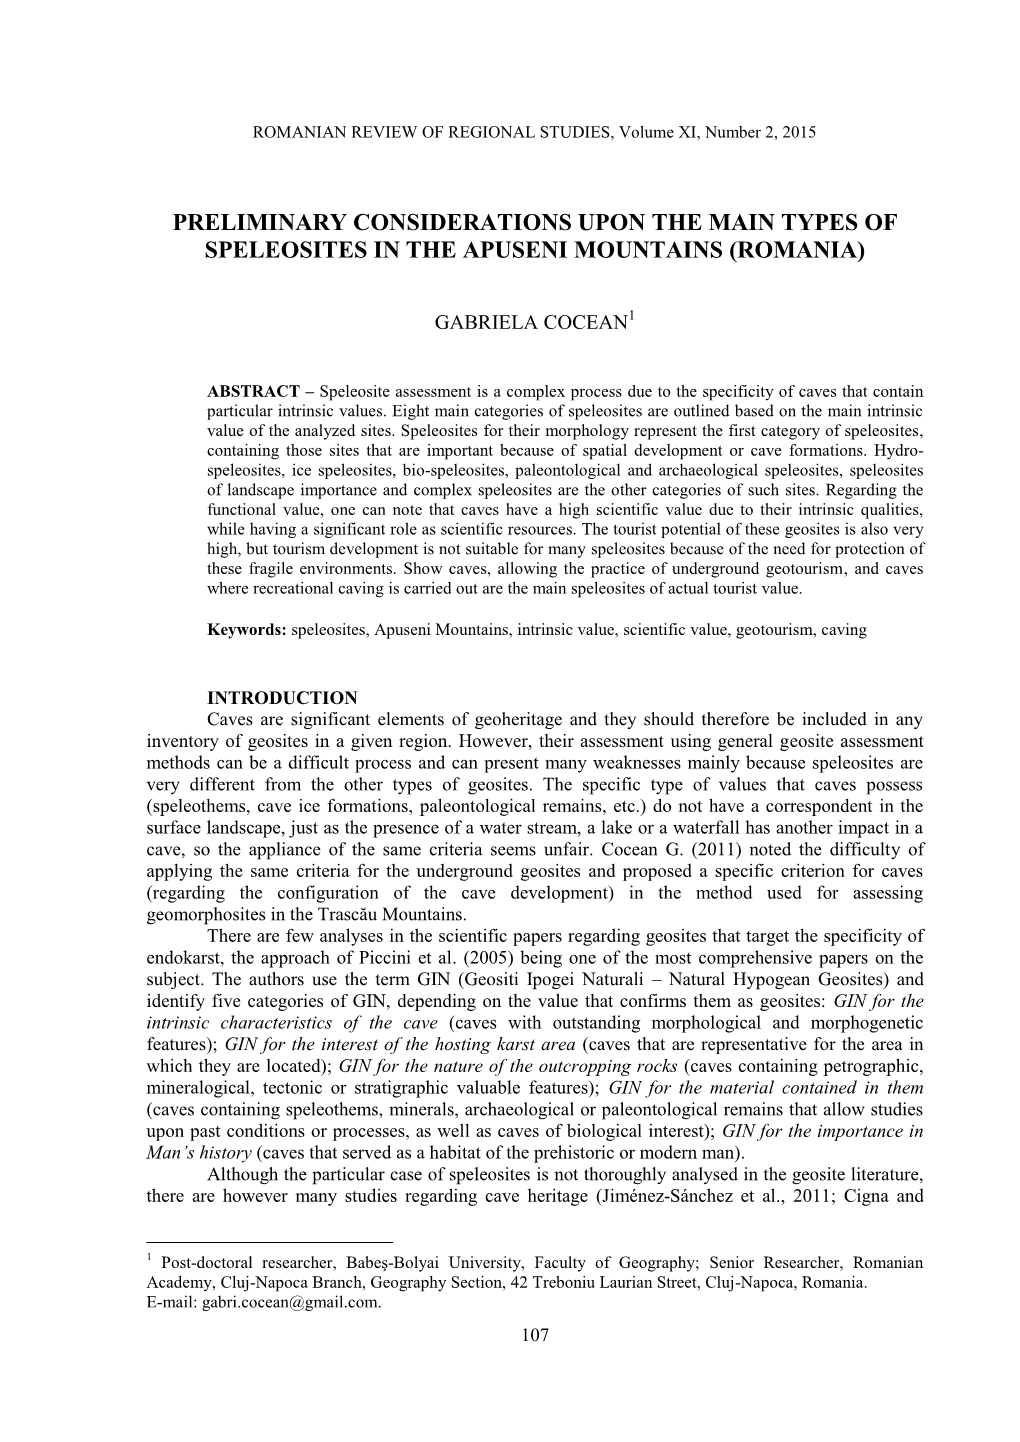 Preliminary Considerations Upon the Main Types of Speleosites in the Apuseni Mountains (Romania)